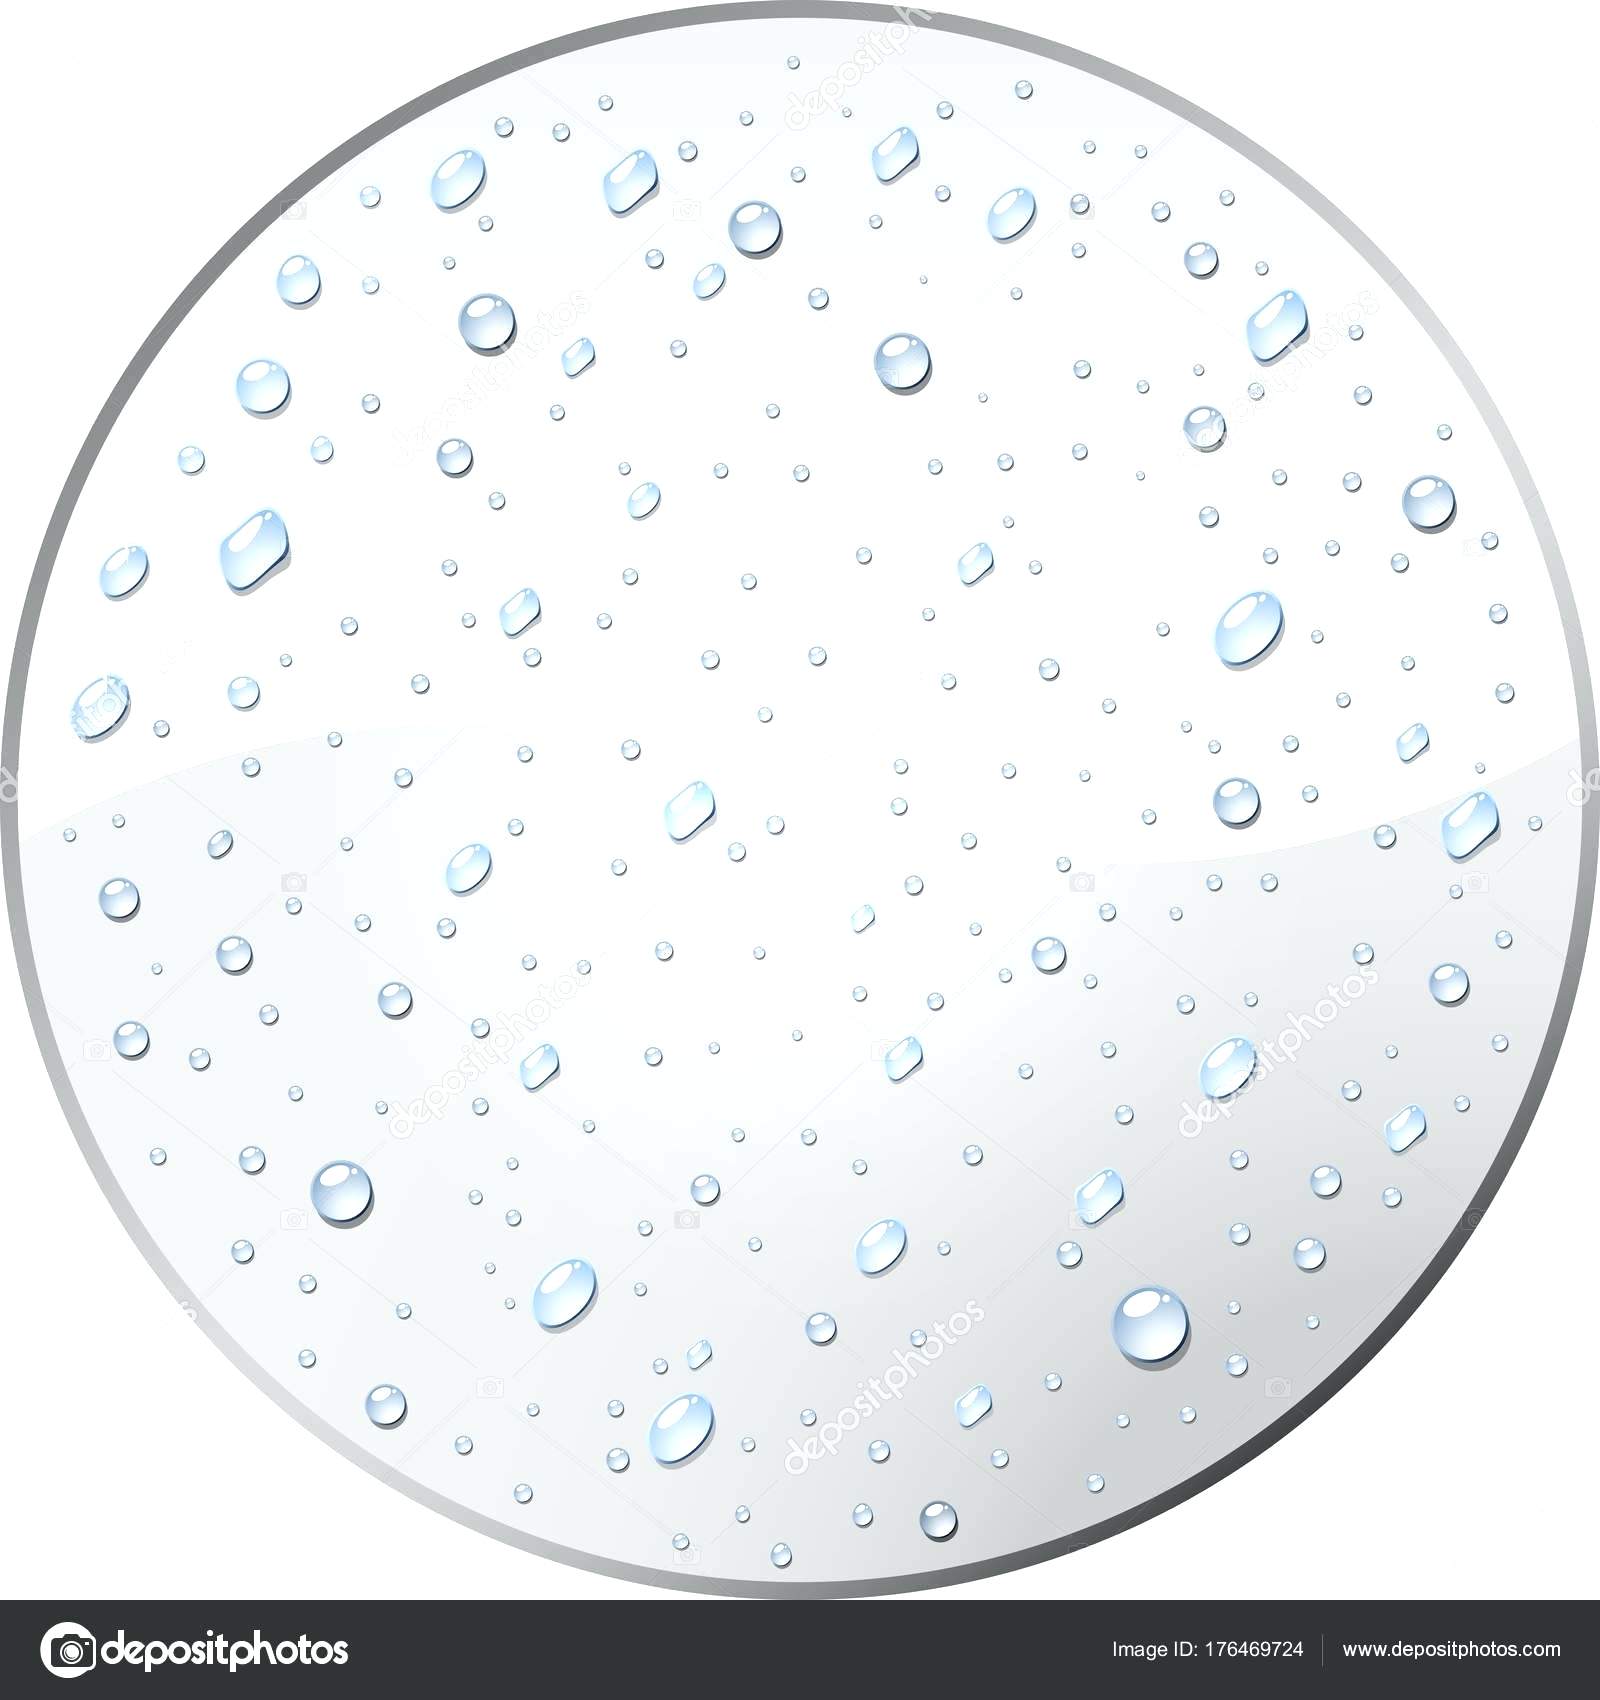 Round water droplets photo